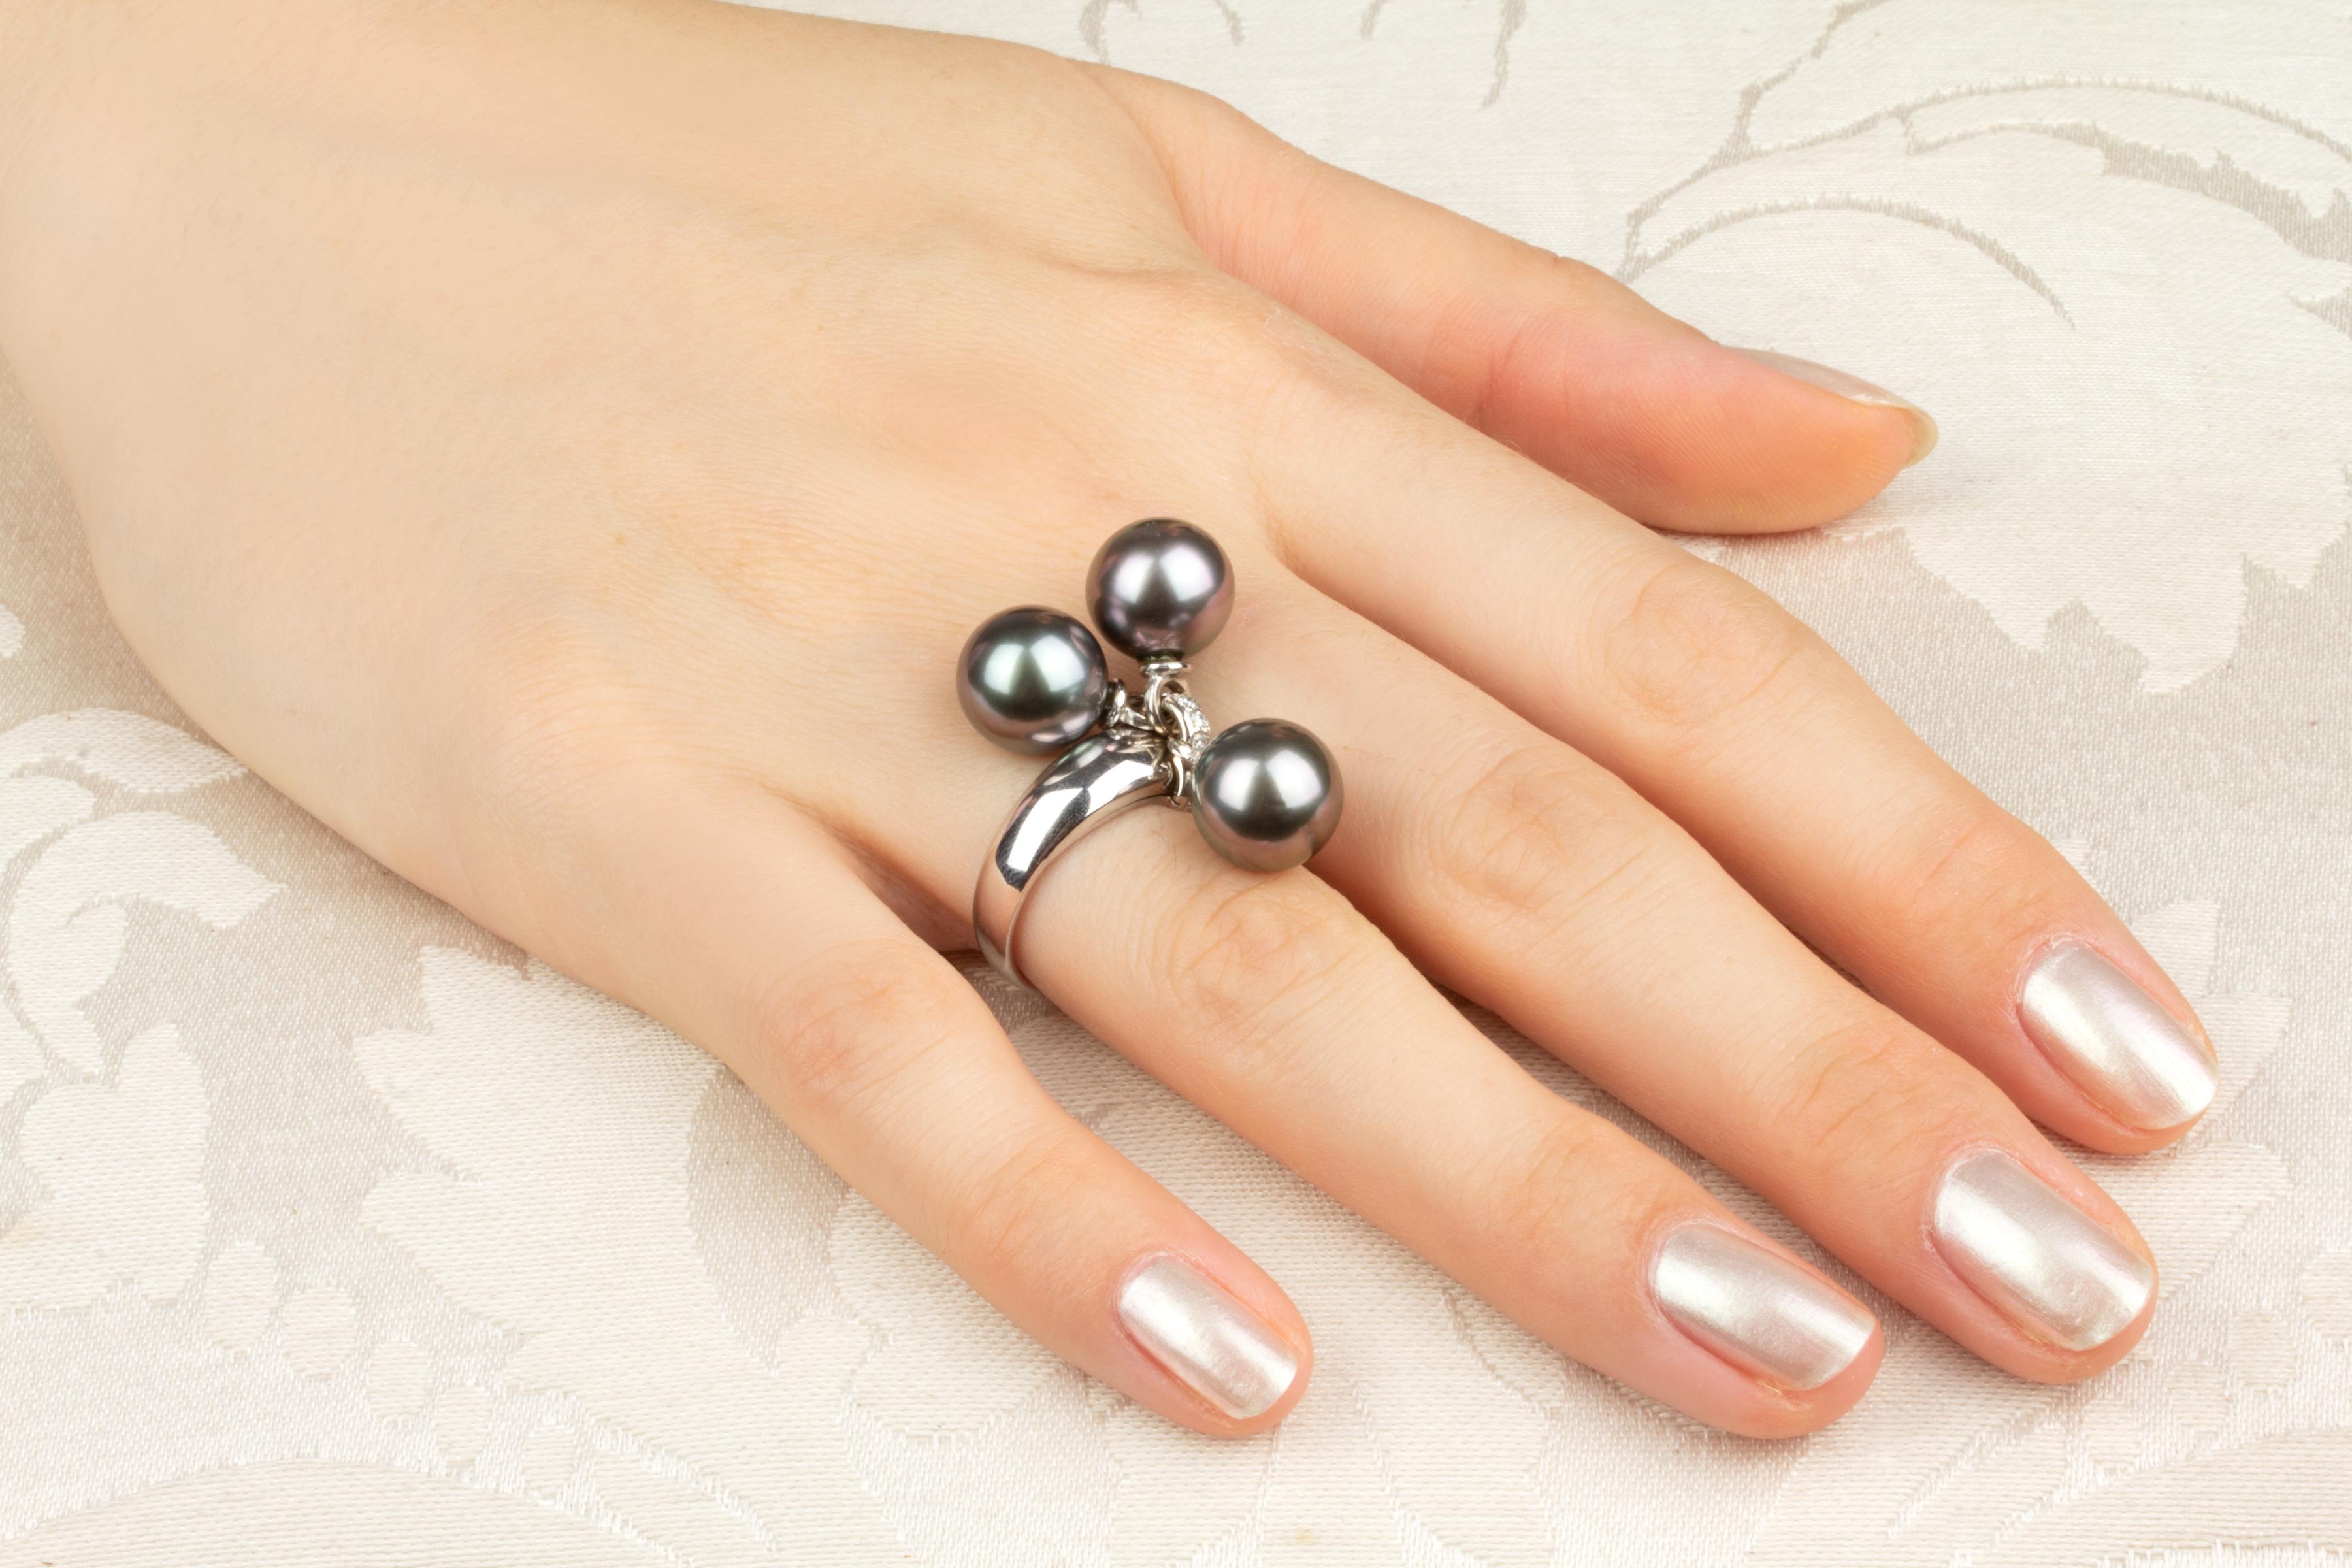 This Tahitian pearl and diamond ring features three pearls of 10mm diameter. The pearls are untreated. They display a fine nacre and their natural color and luster have not been enhanced in any way. Each pearl is separately attached to the center of